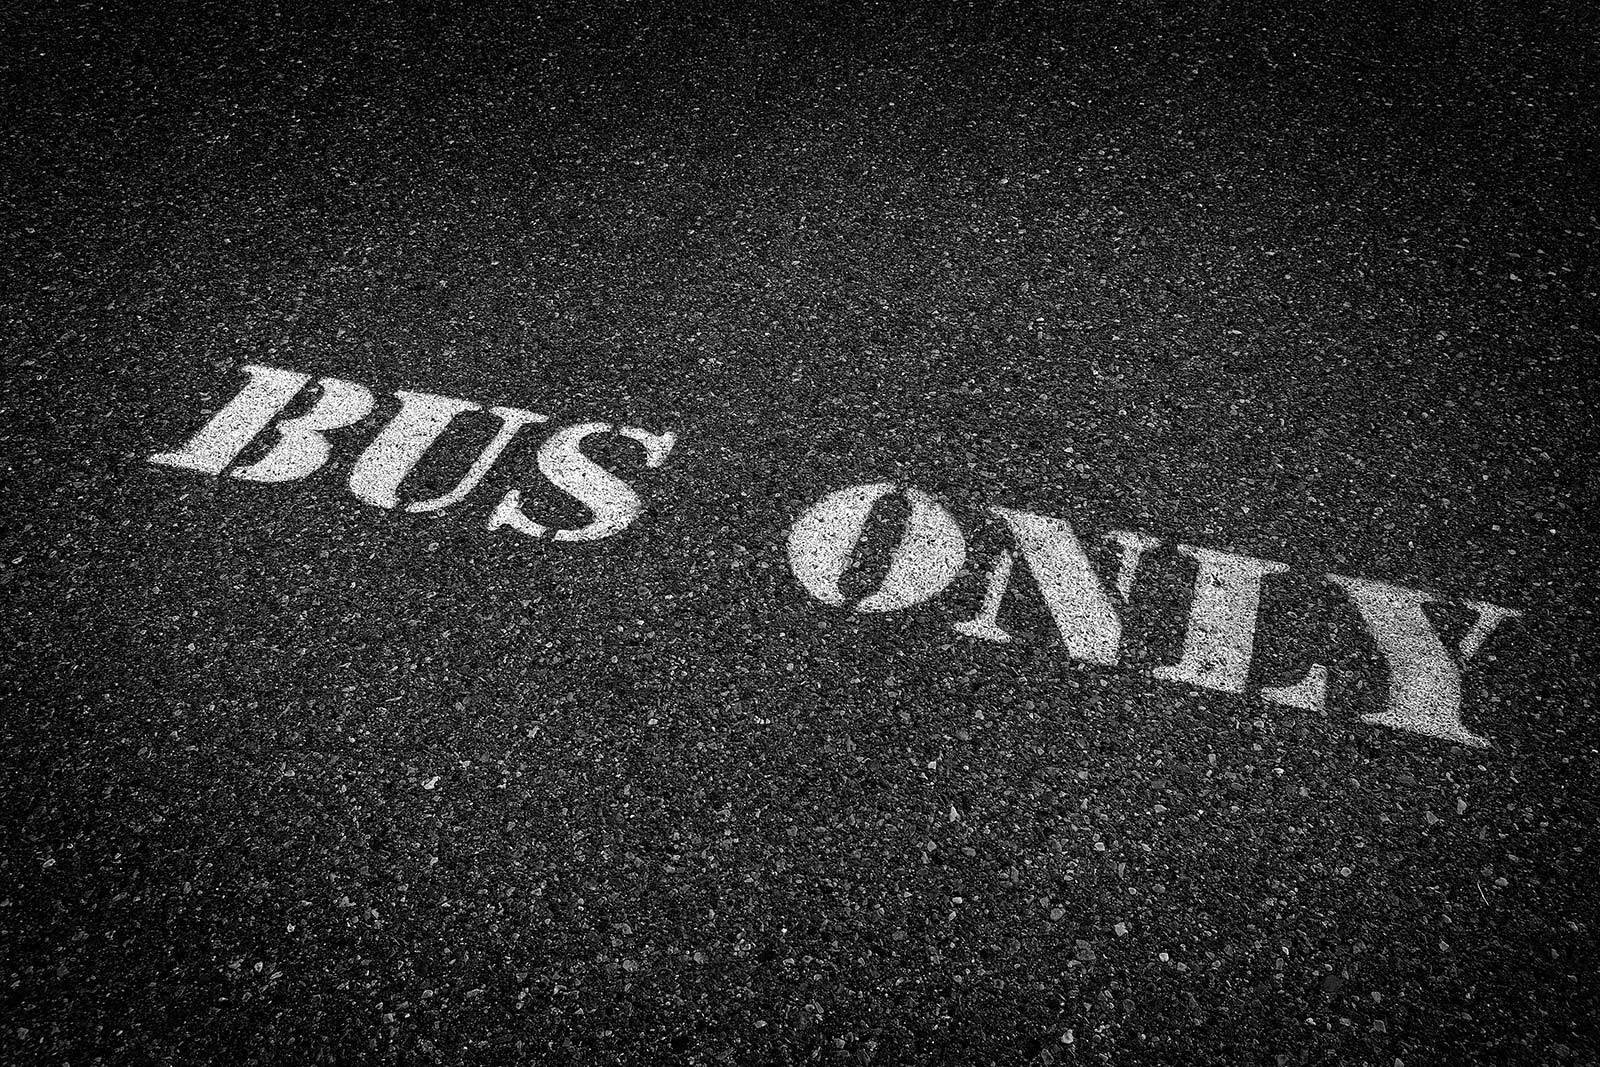 Bus lane - busses only